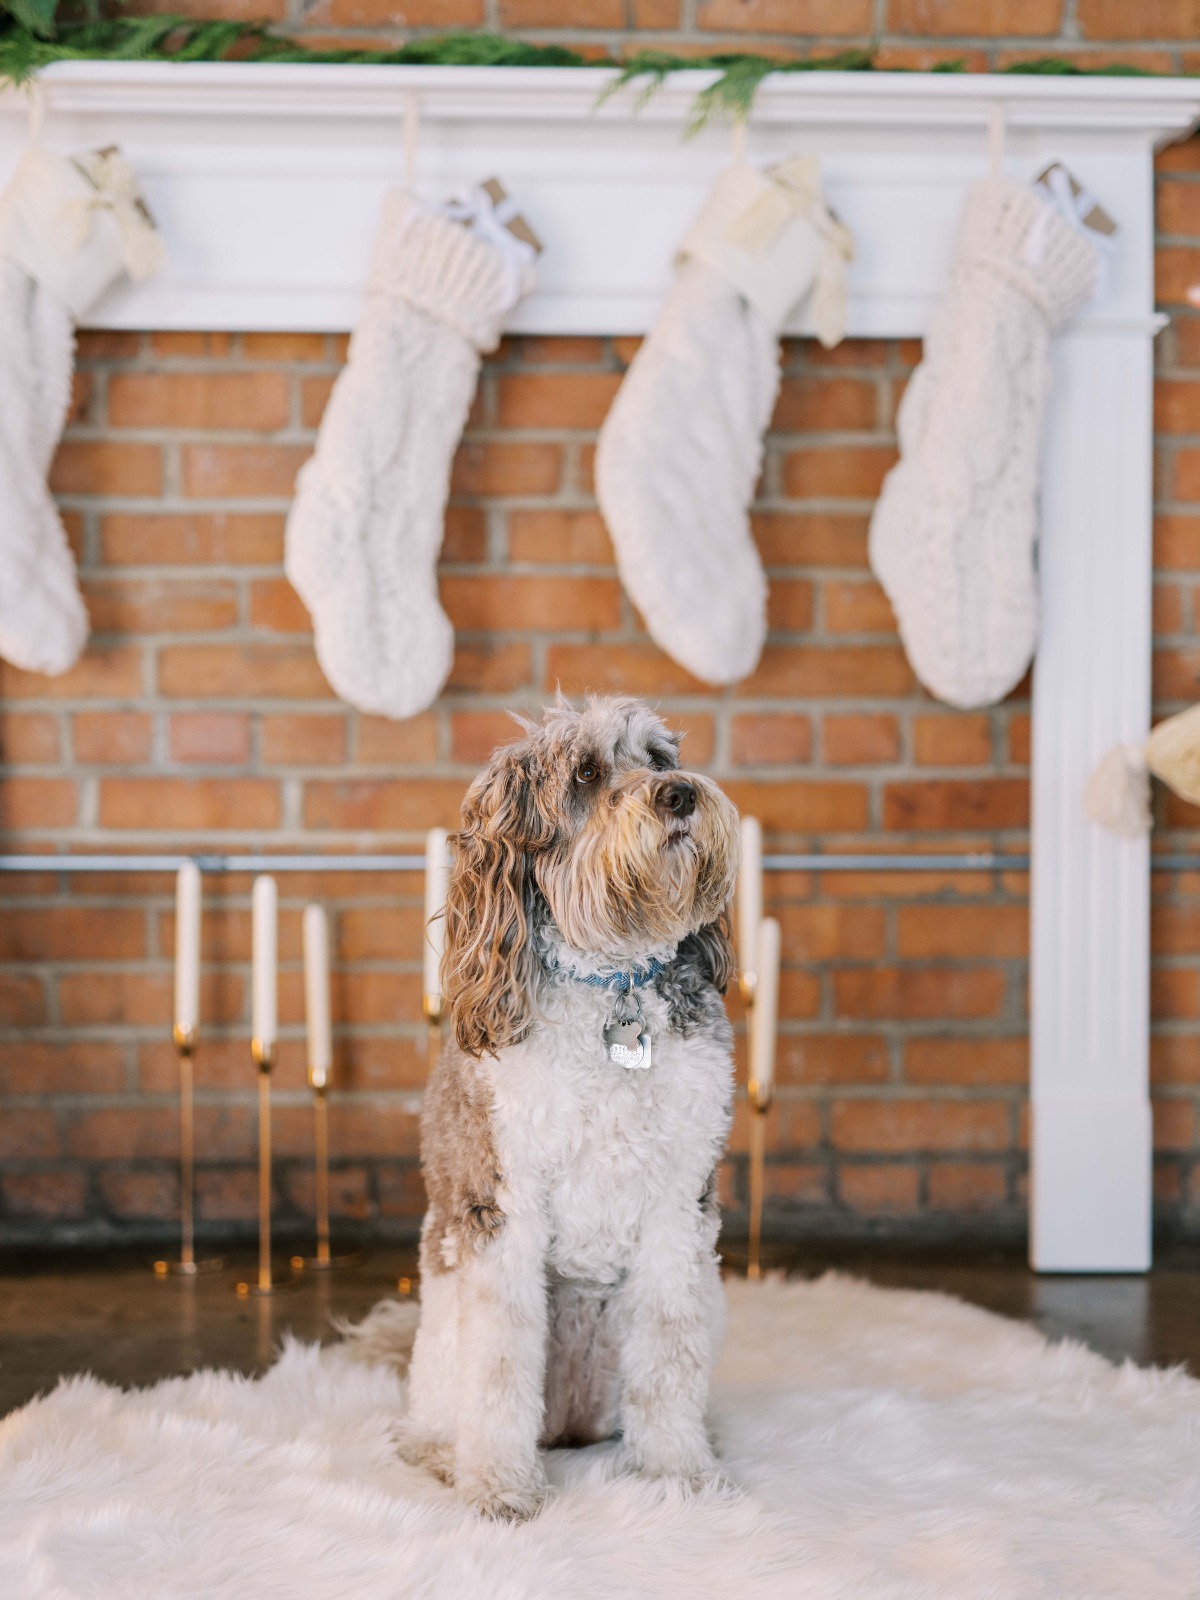 Snow Place Like Home  Styled Shoot